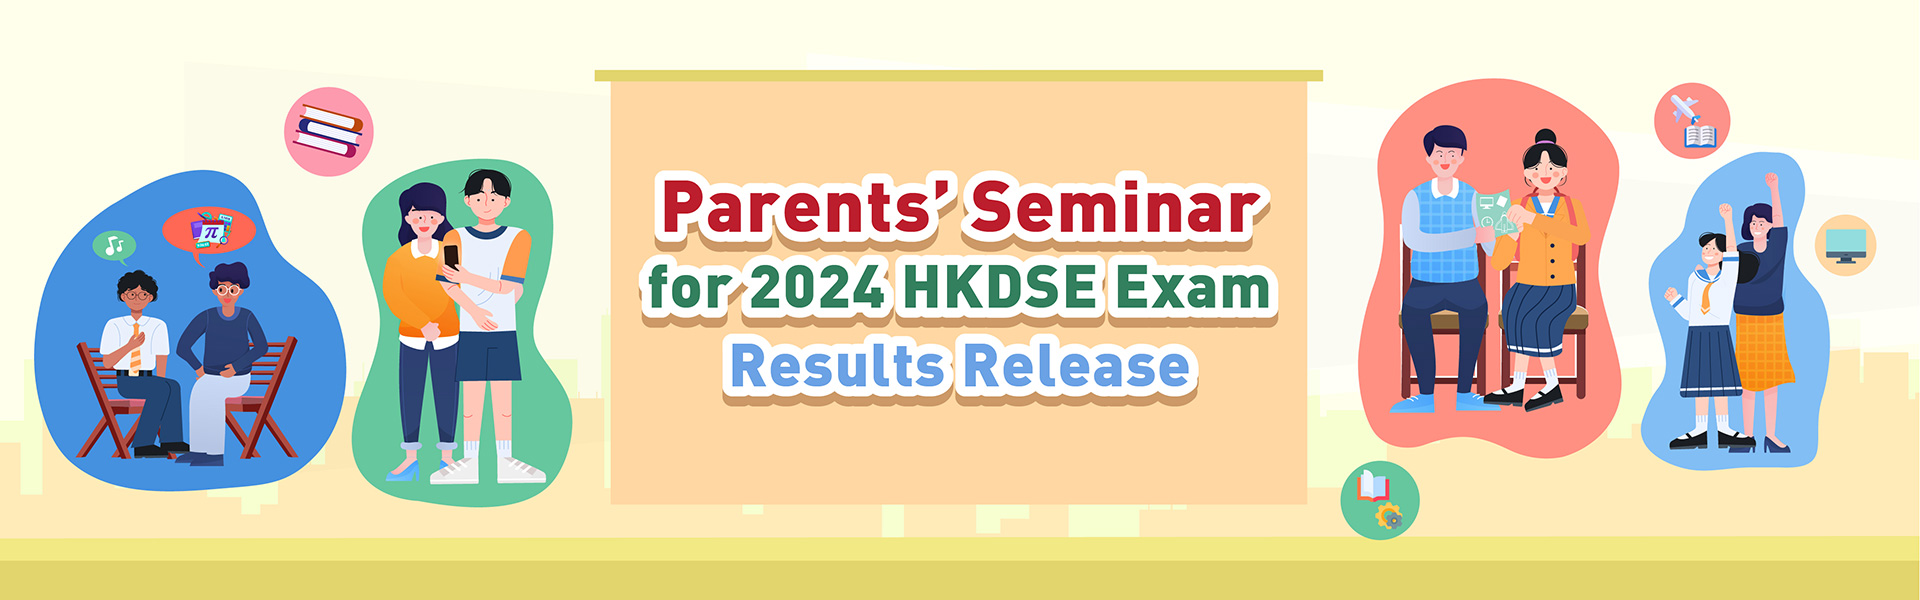 Parents' Seminar for 2024 HKDSE Exam Results Release